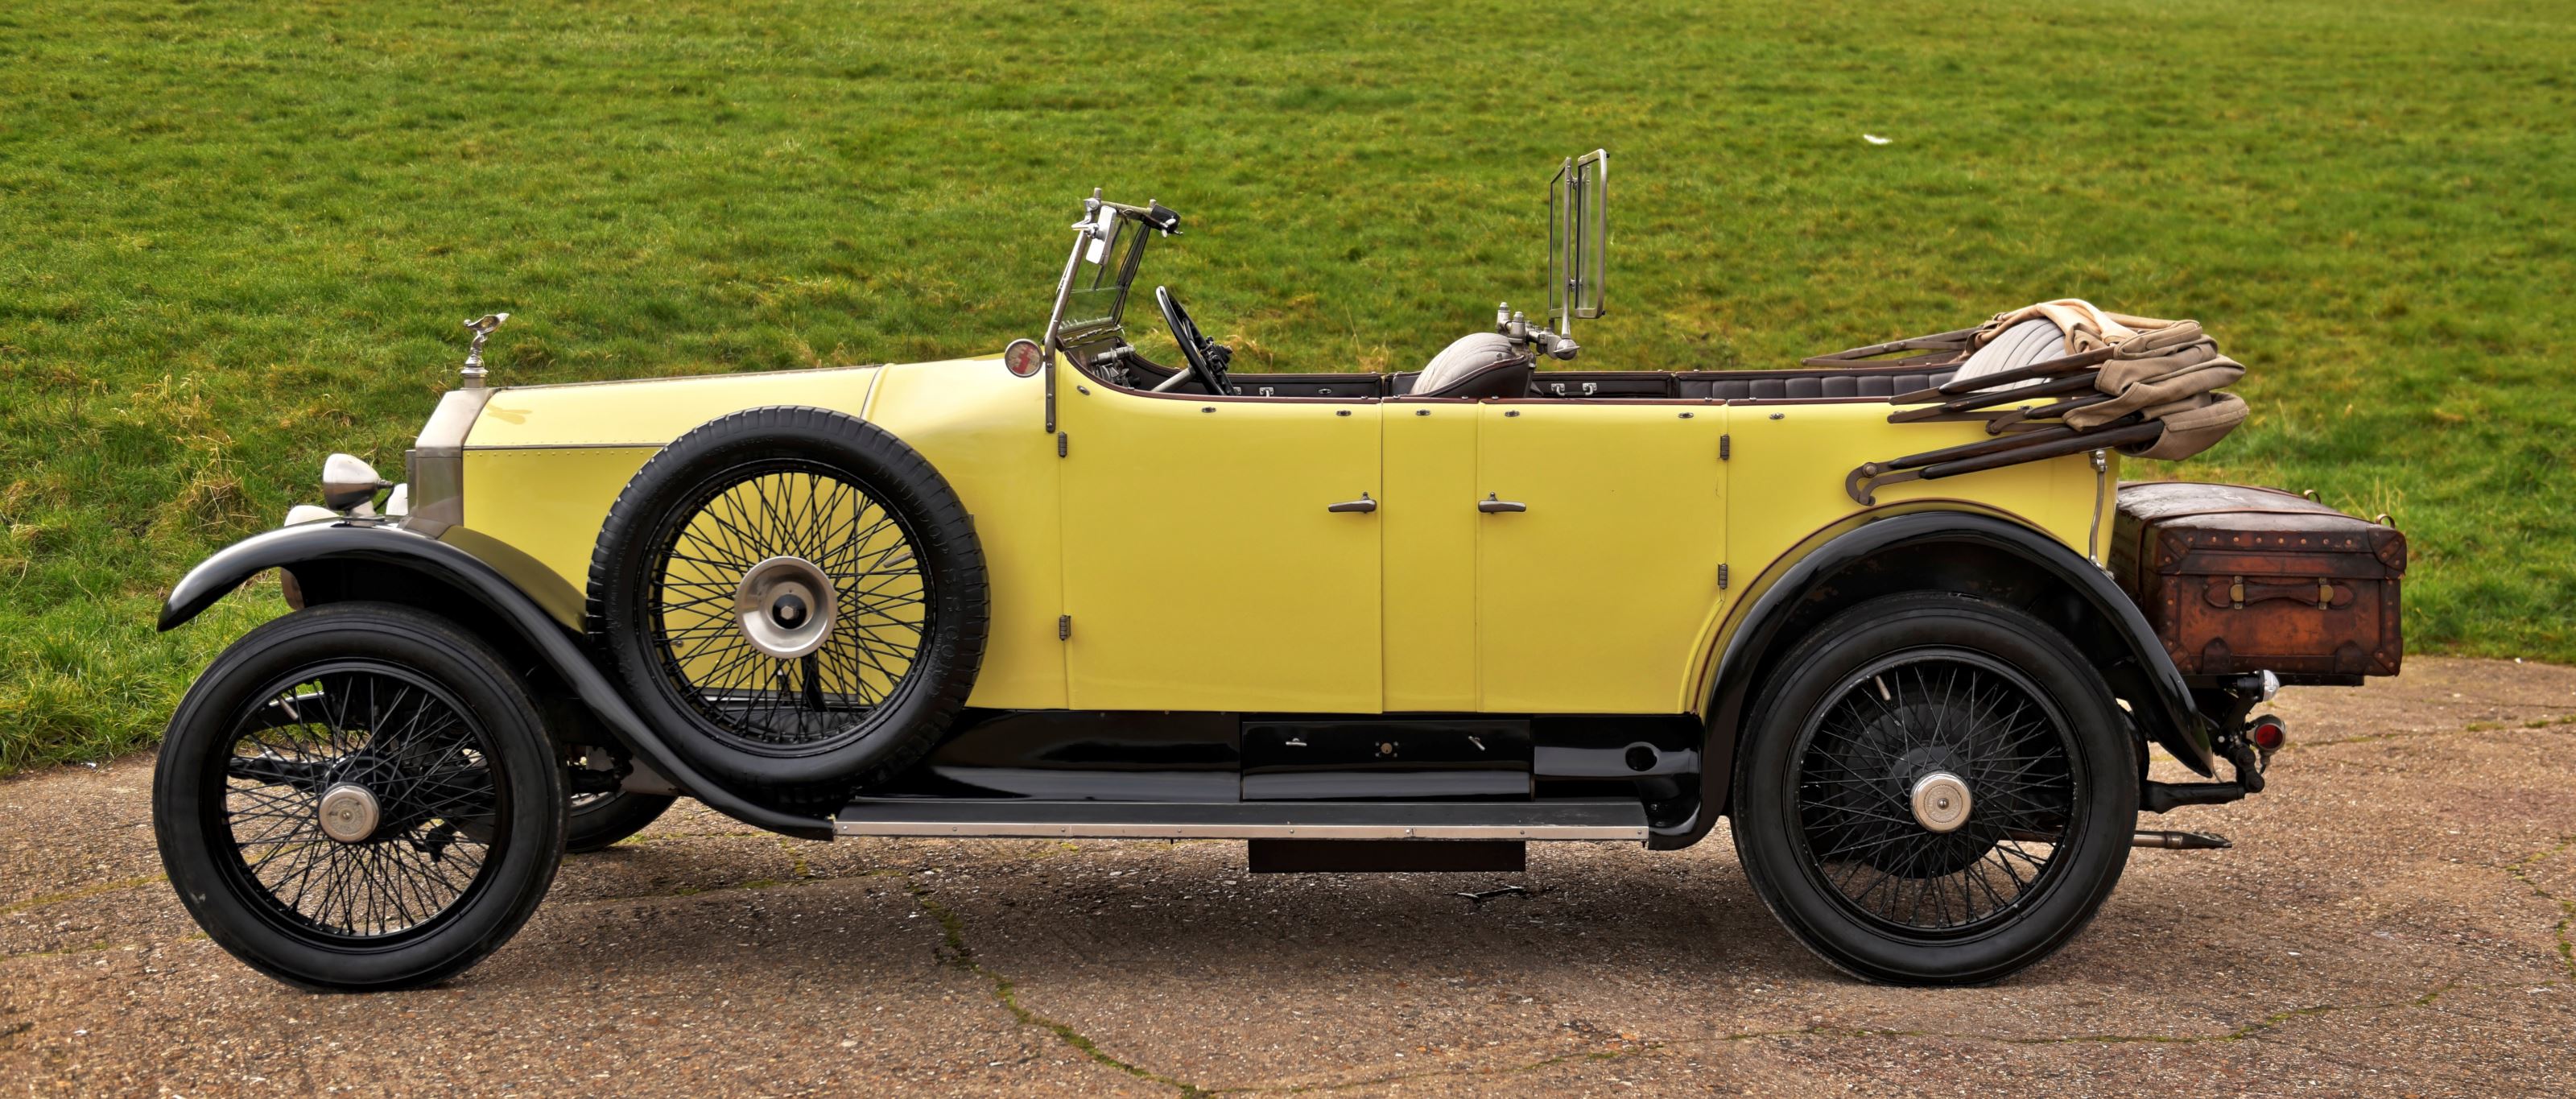 Rolls royce 20hp tourer by hamshaws of leicester wp3r8eh6w9rzjvgwlhxcl